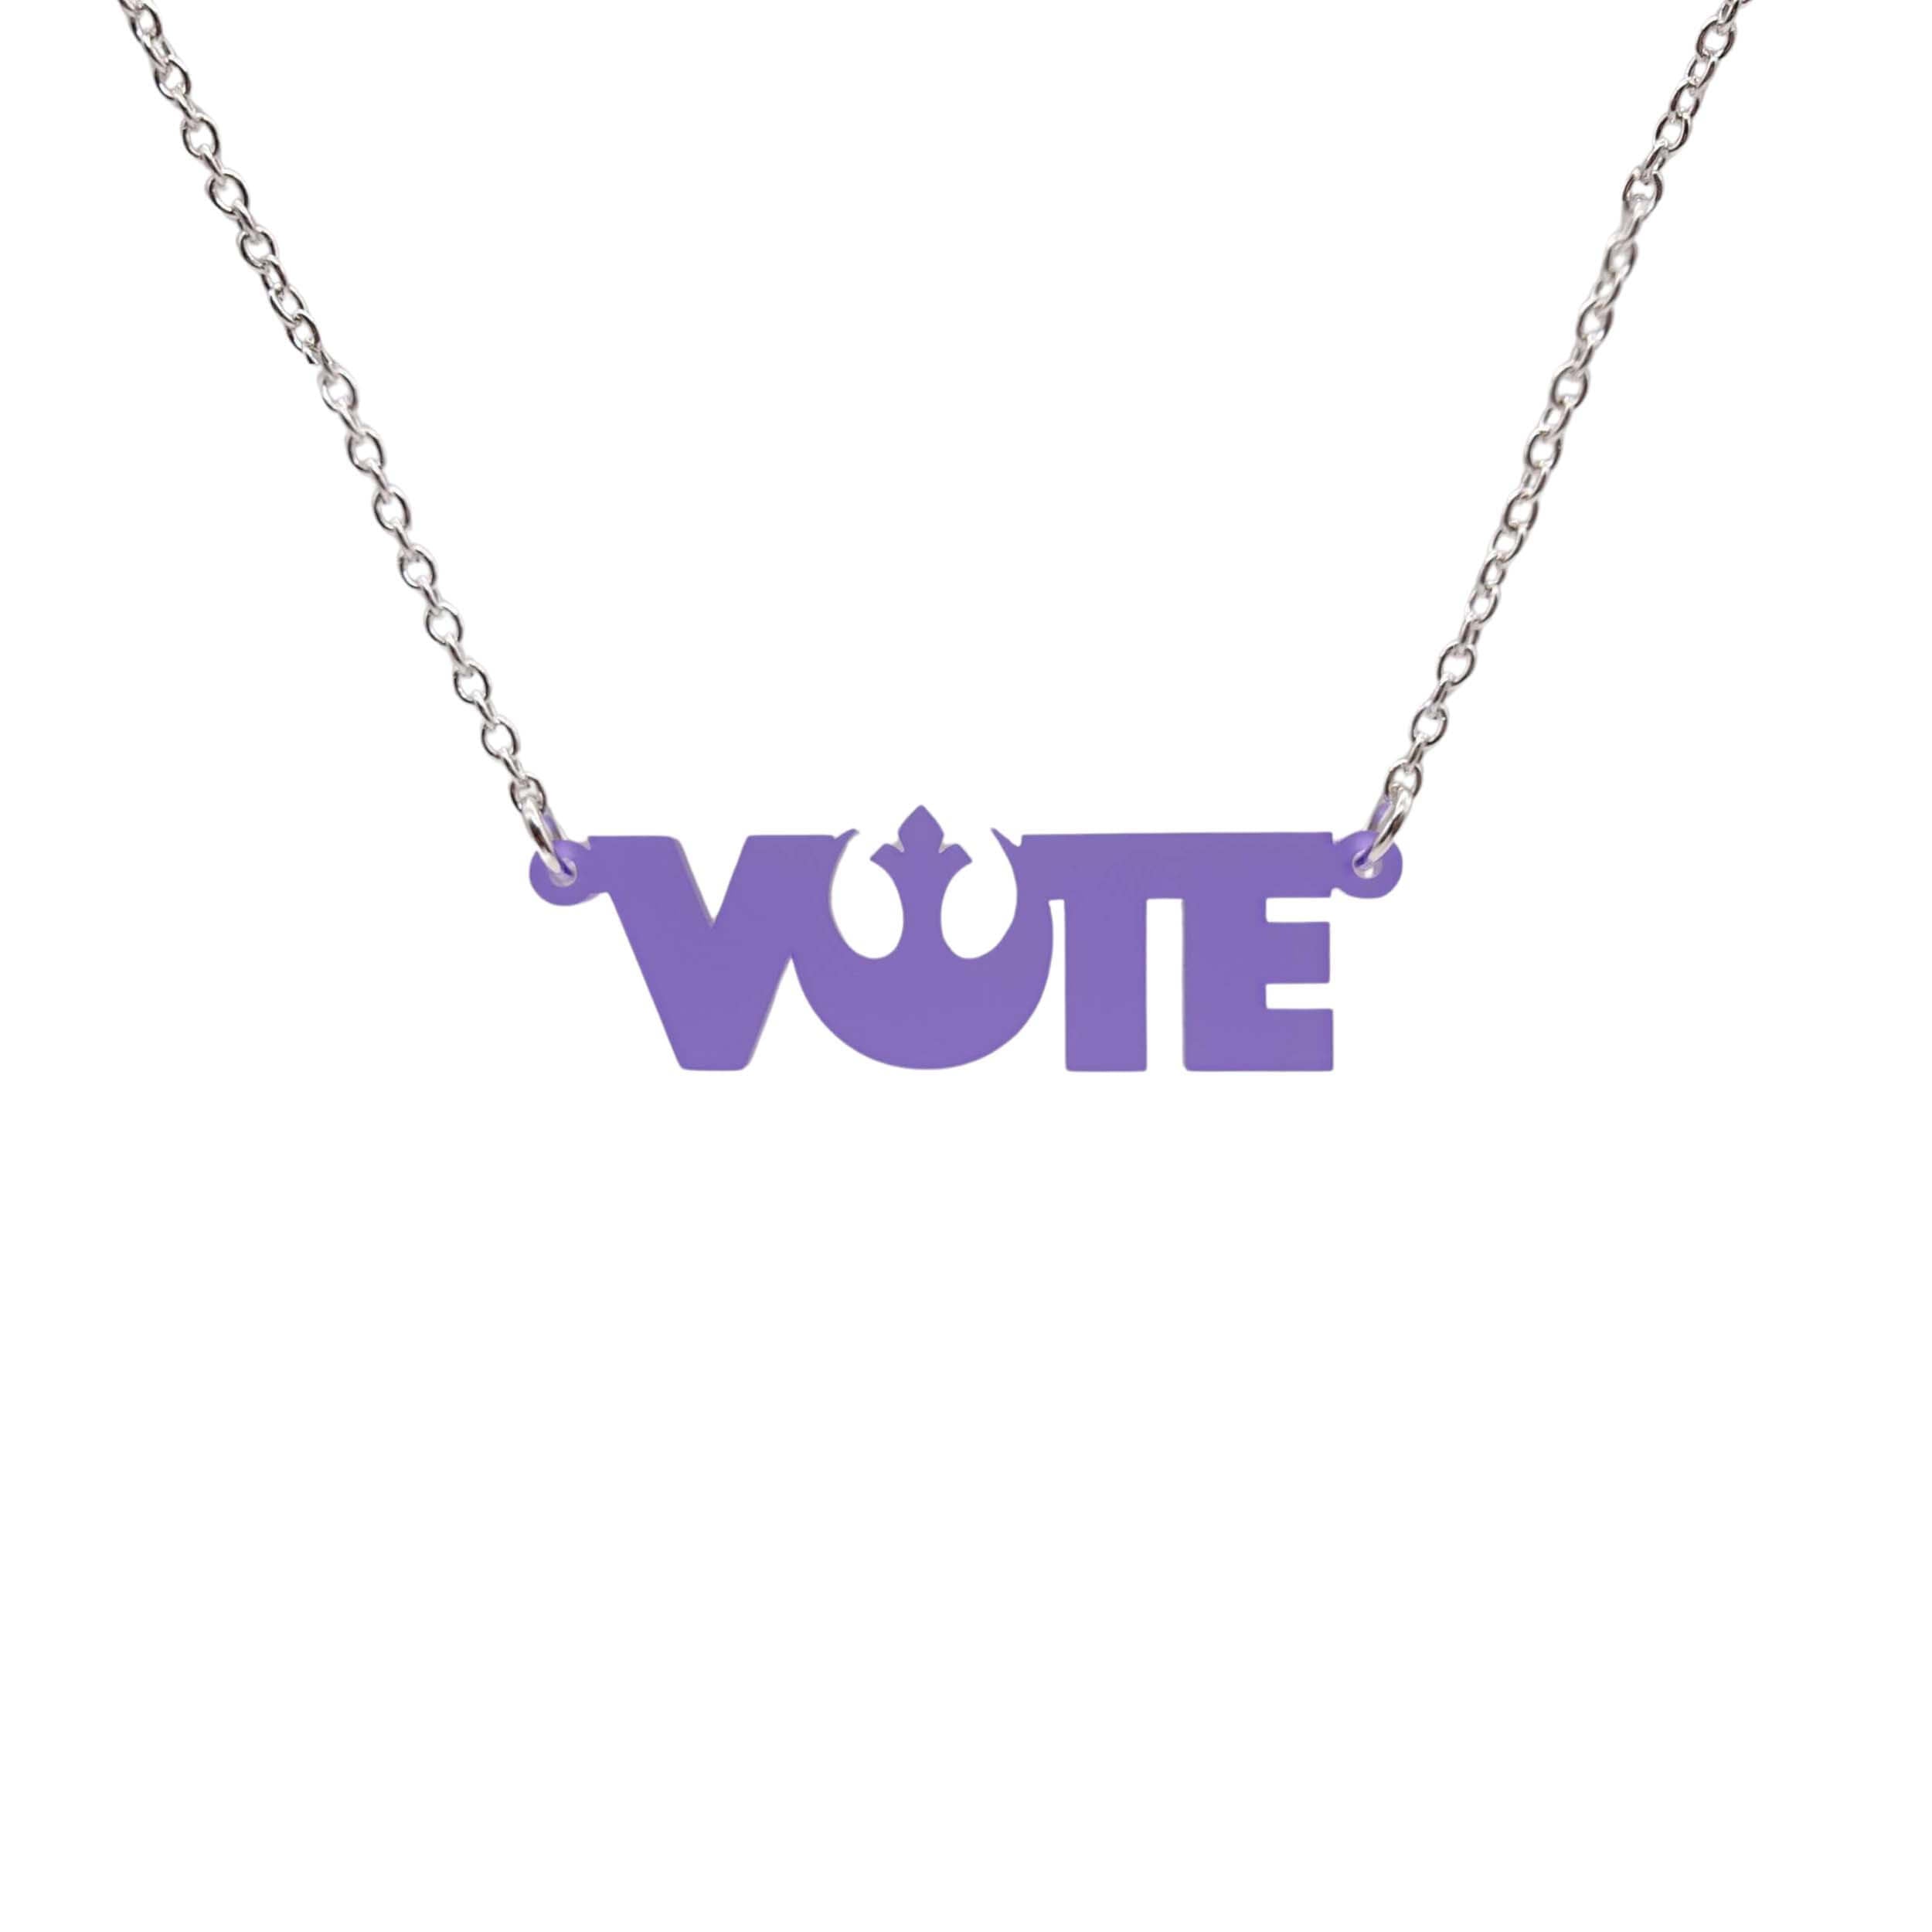 Rebel Alliance Vote necklace in violet frost shown hanging against a white background. 